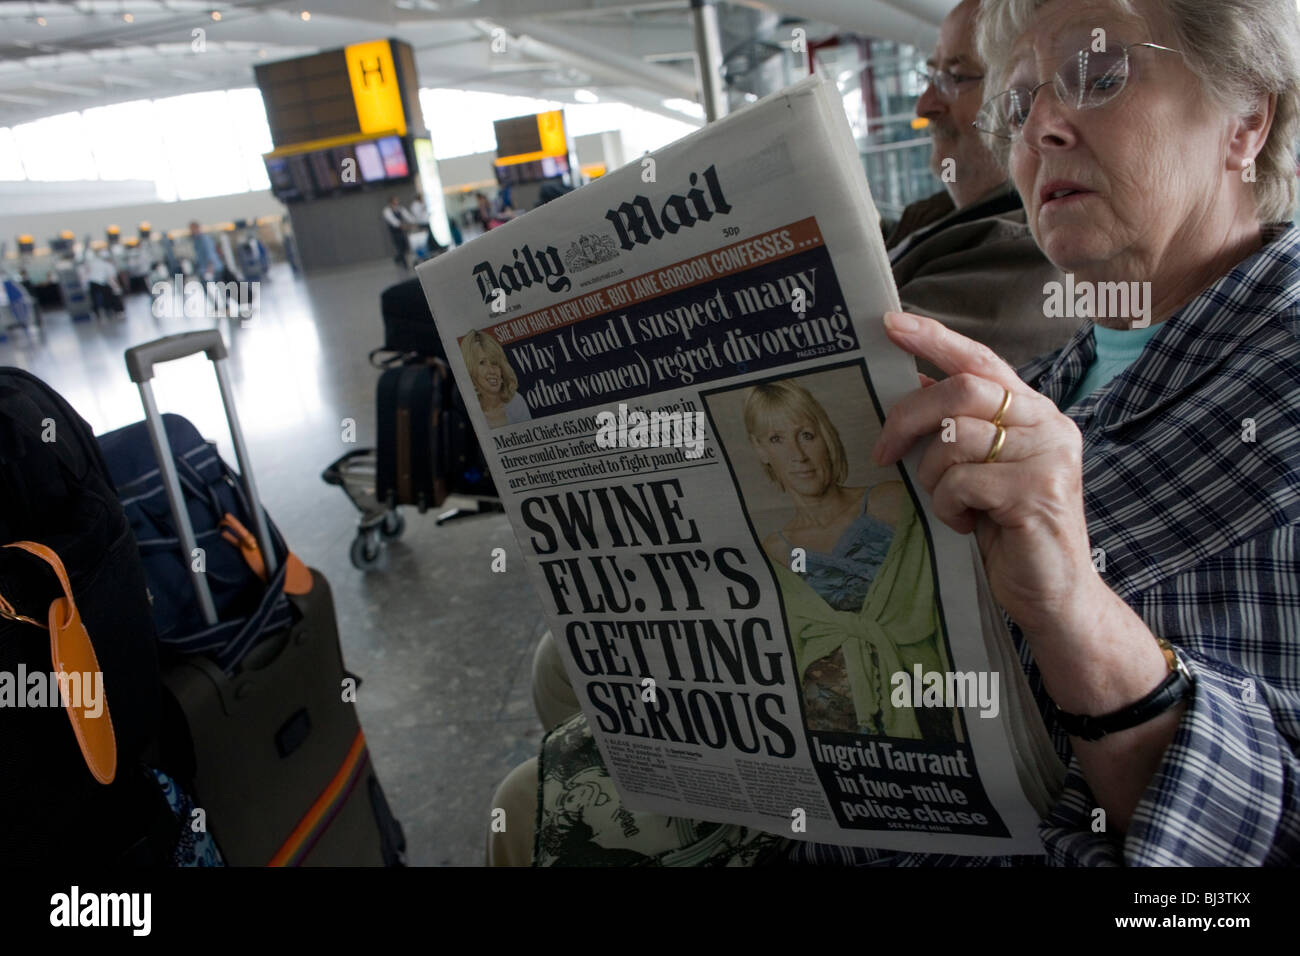 Two elderly but travel-wise passengers read the Daily Mail newspaper while awaiting their check-in zone at Heathrow airport. Stock Photo